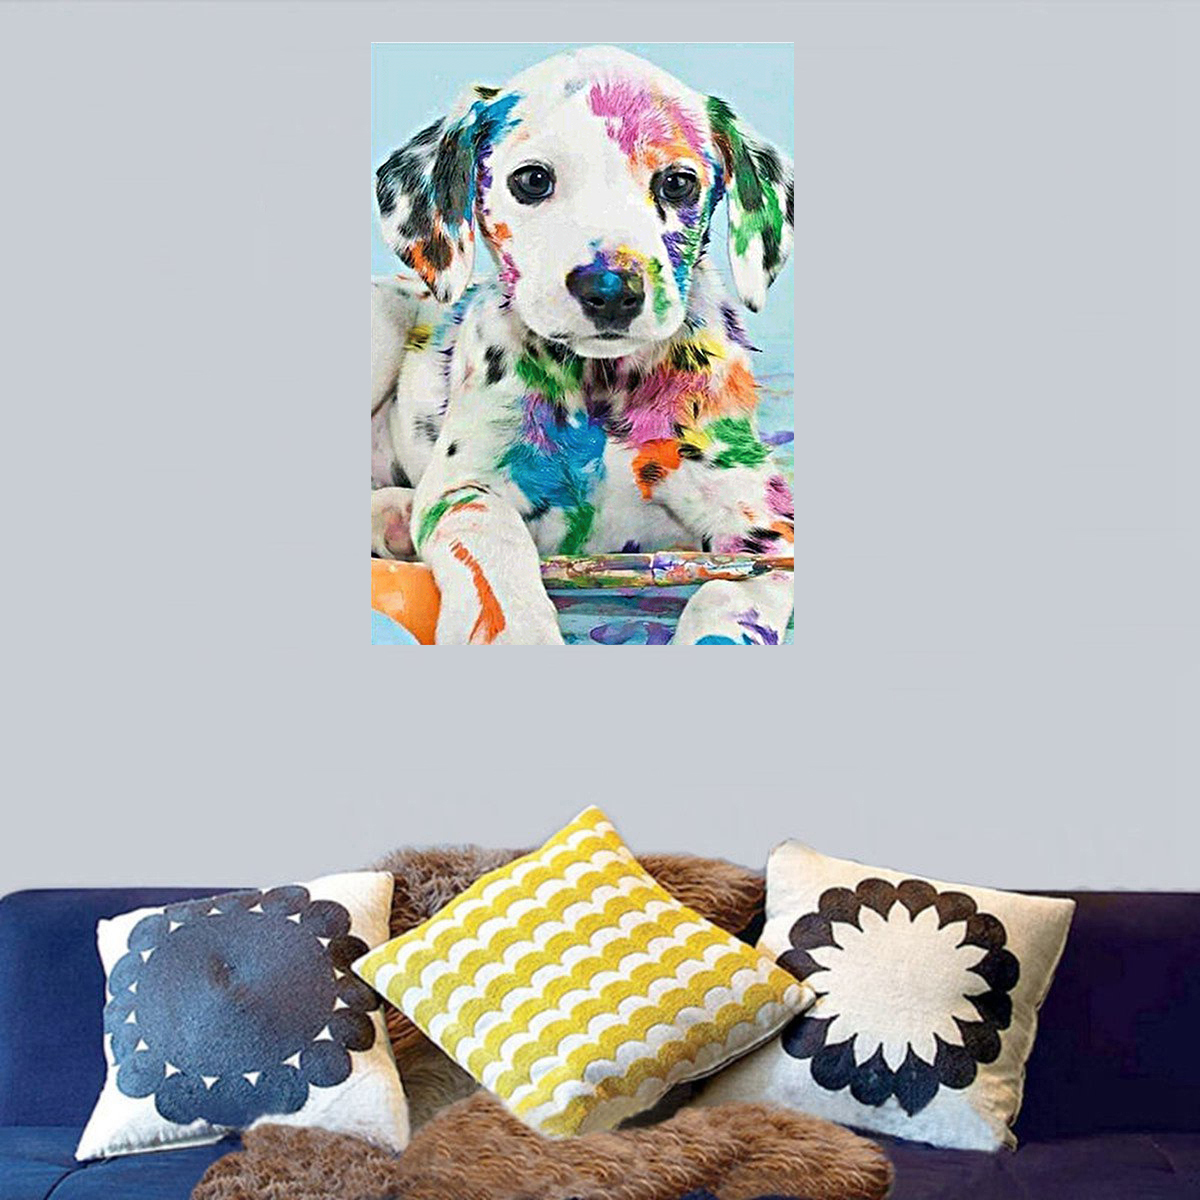 DIY-Diamond-Painting-Animal-Dog-Wall-Painting-Hanging-Pictures-Handmade-Wall-Decorations-Gifts-Drawi-1744046-8